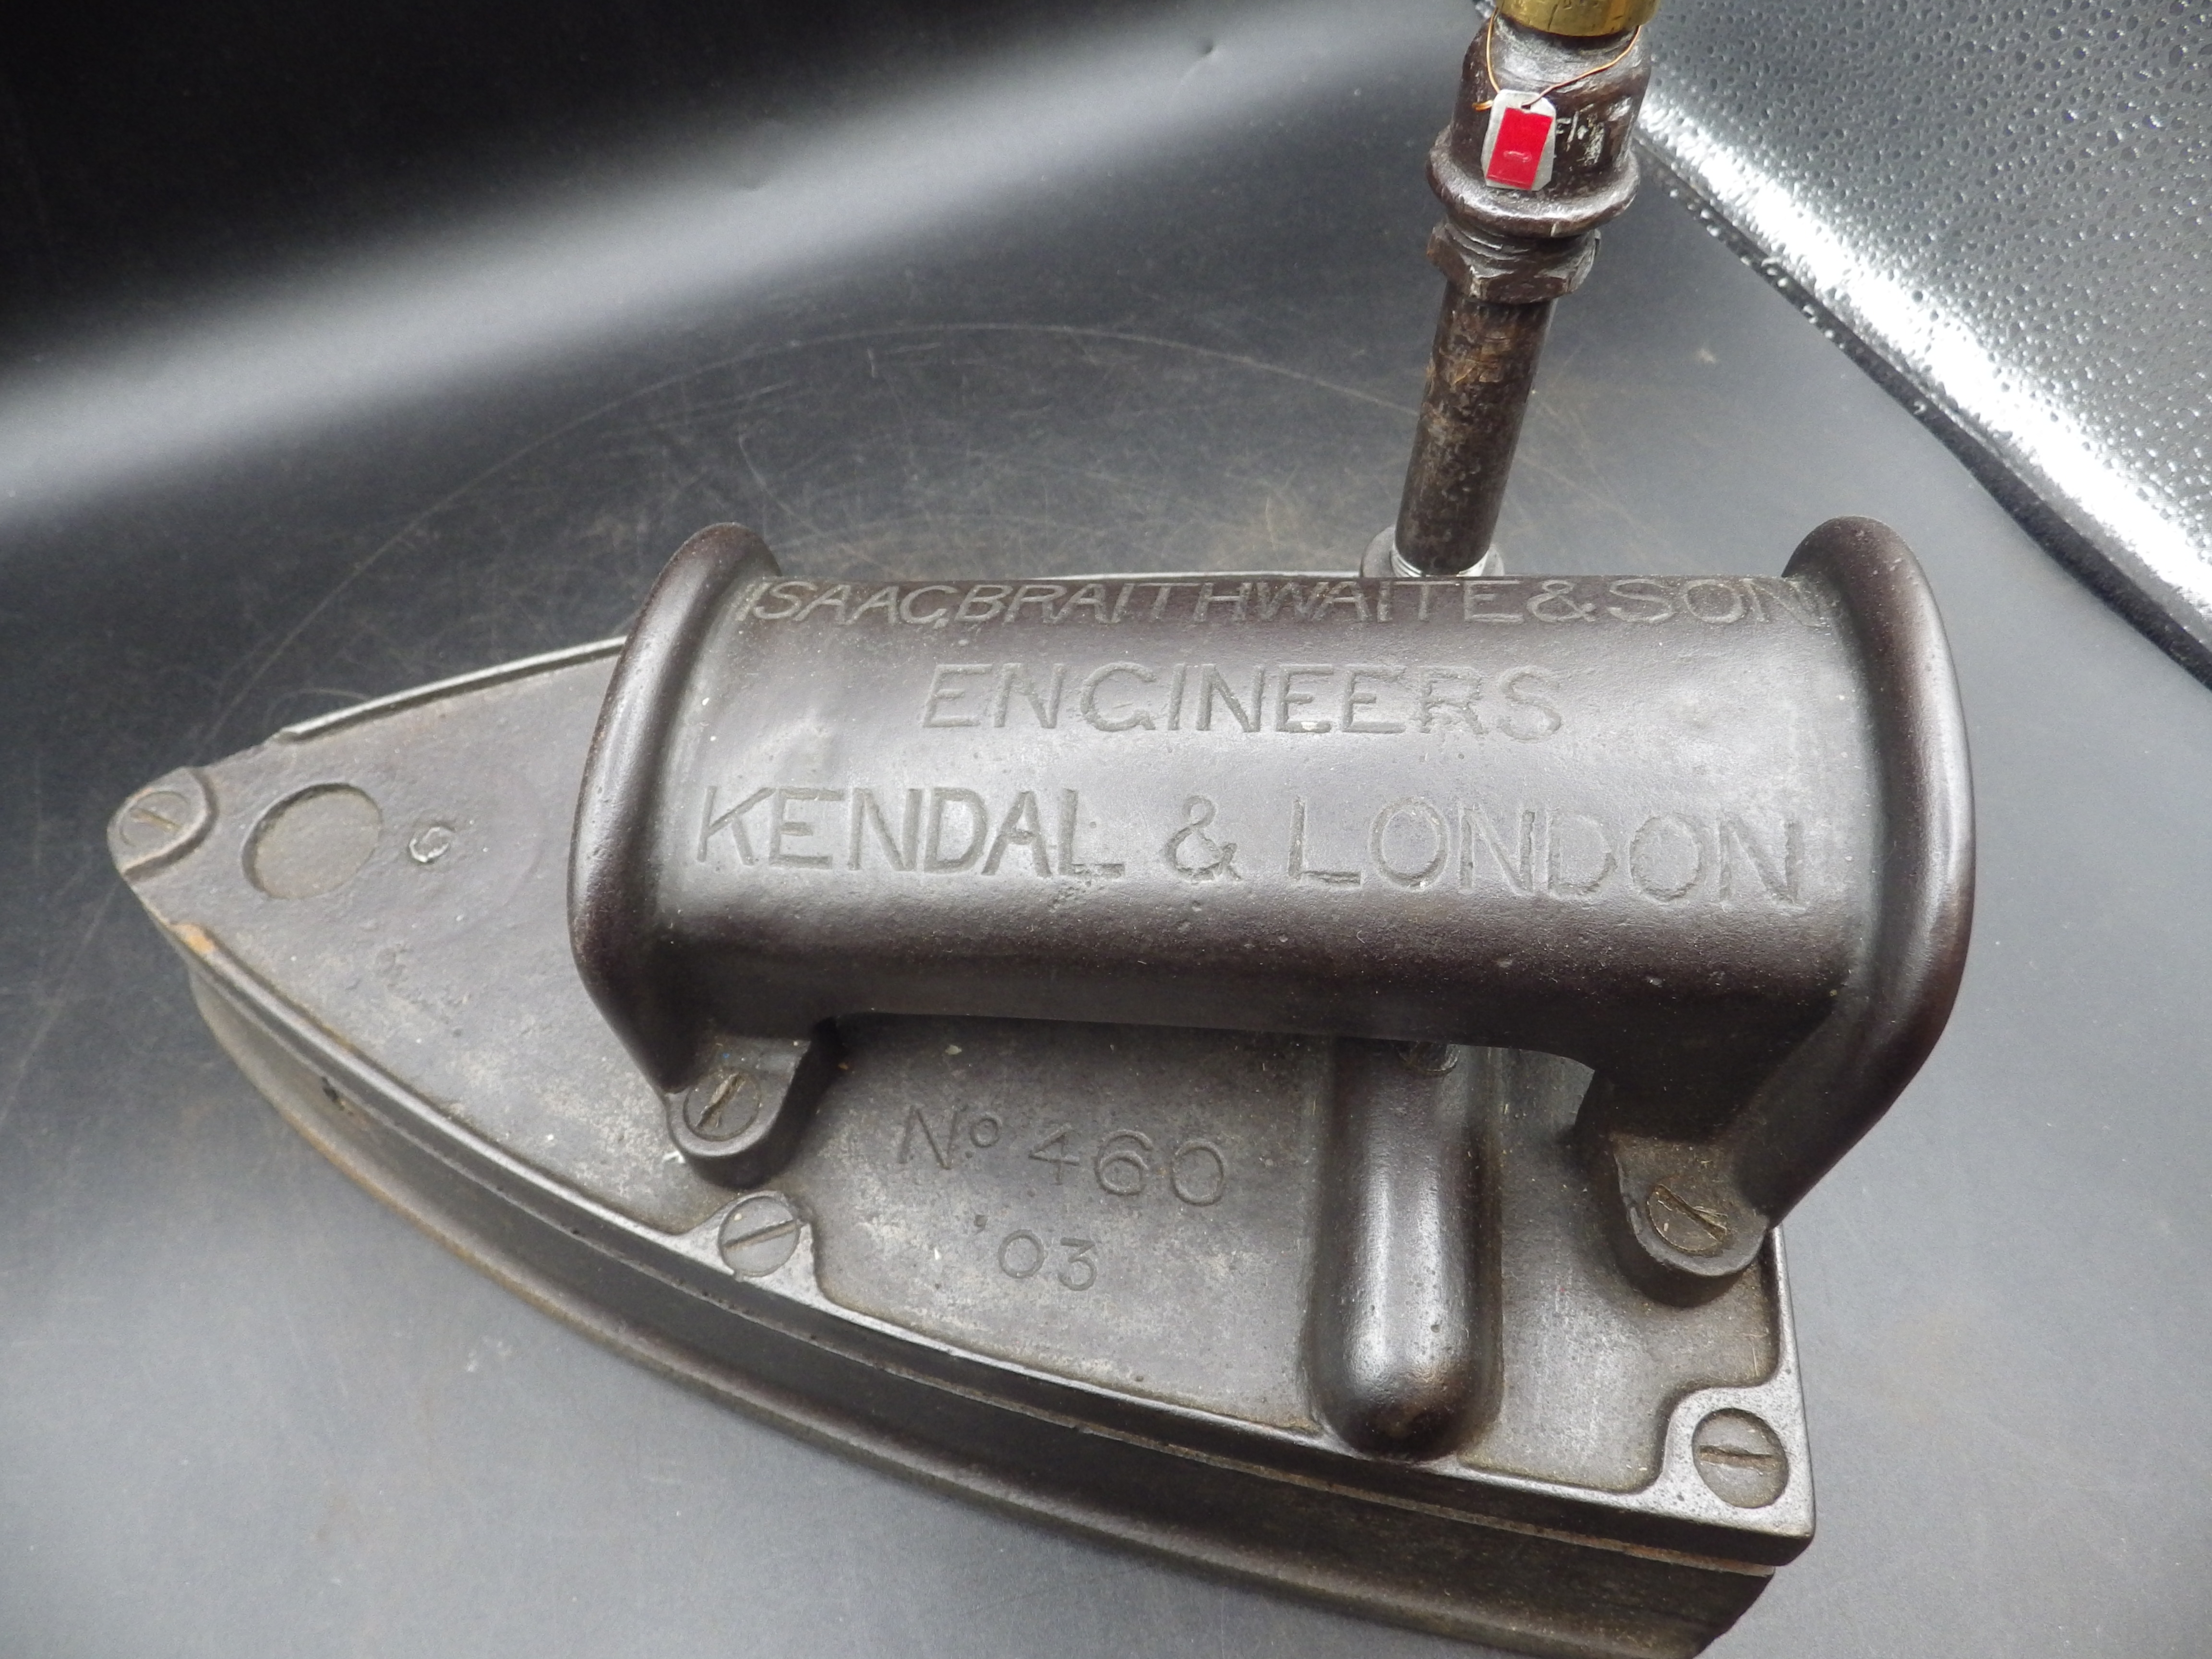 Ibis Patent No 460 gas heated cast iron by Isaac Braithwaite and Son Engineers Kendal and London, - Image 2 of 5